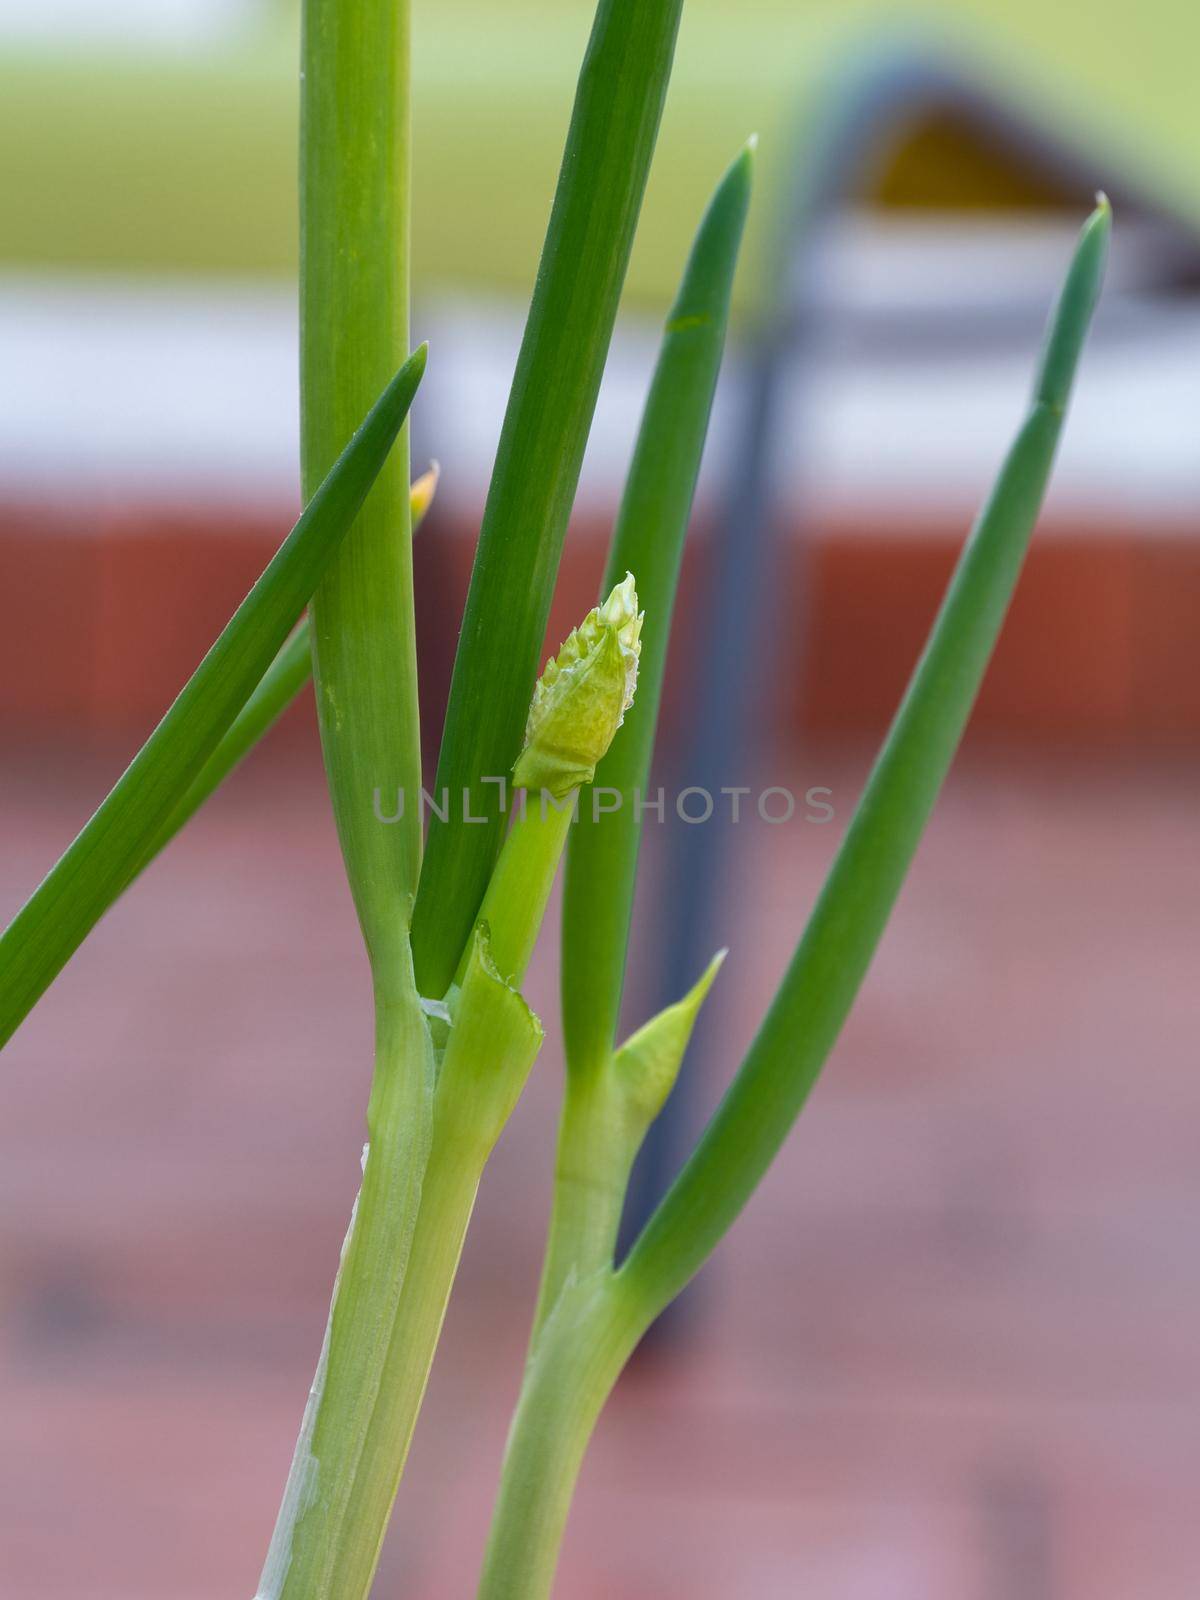 Gardening and horticulture at home on a terrace. Green spring onion growing for cooking. Close-up vertical shot